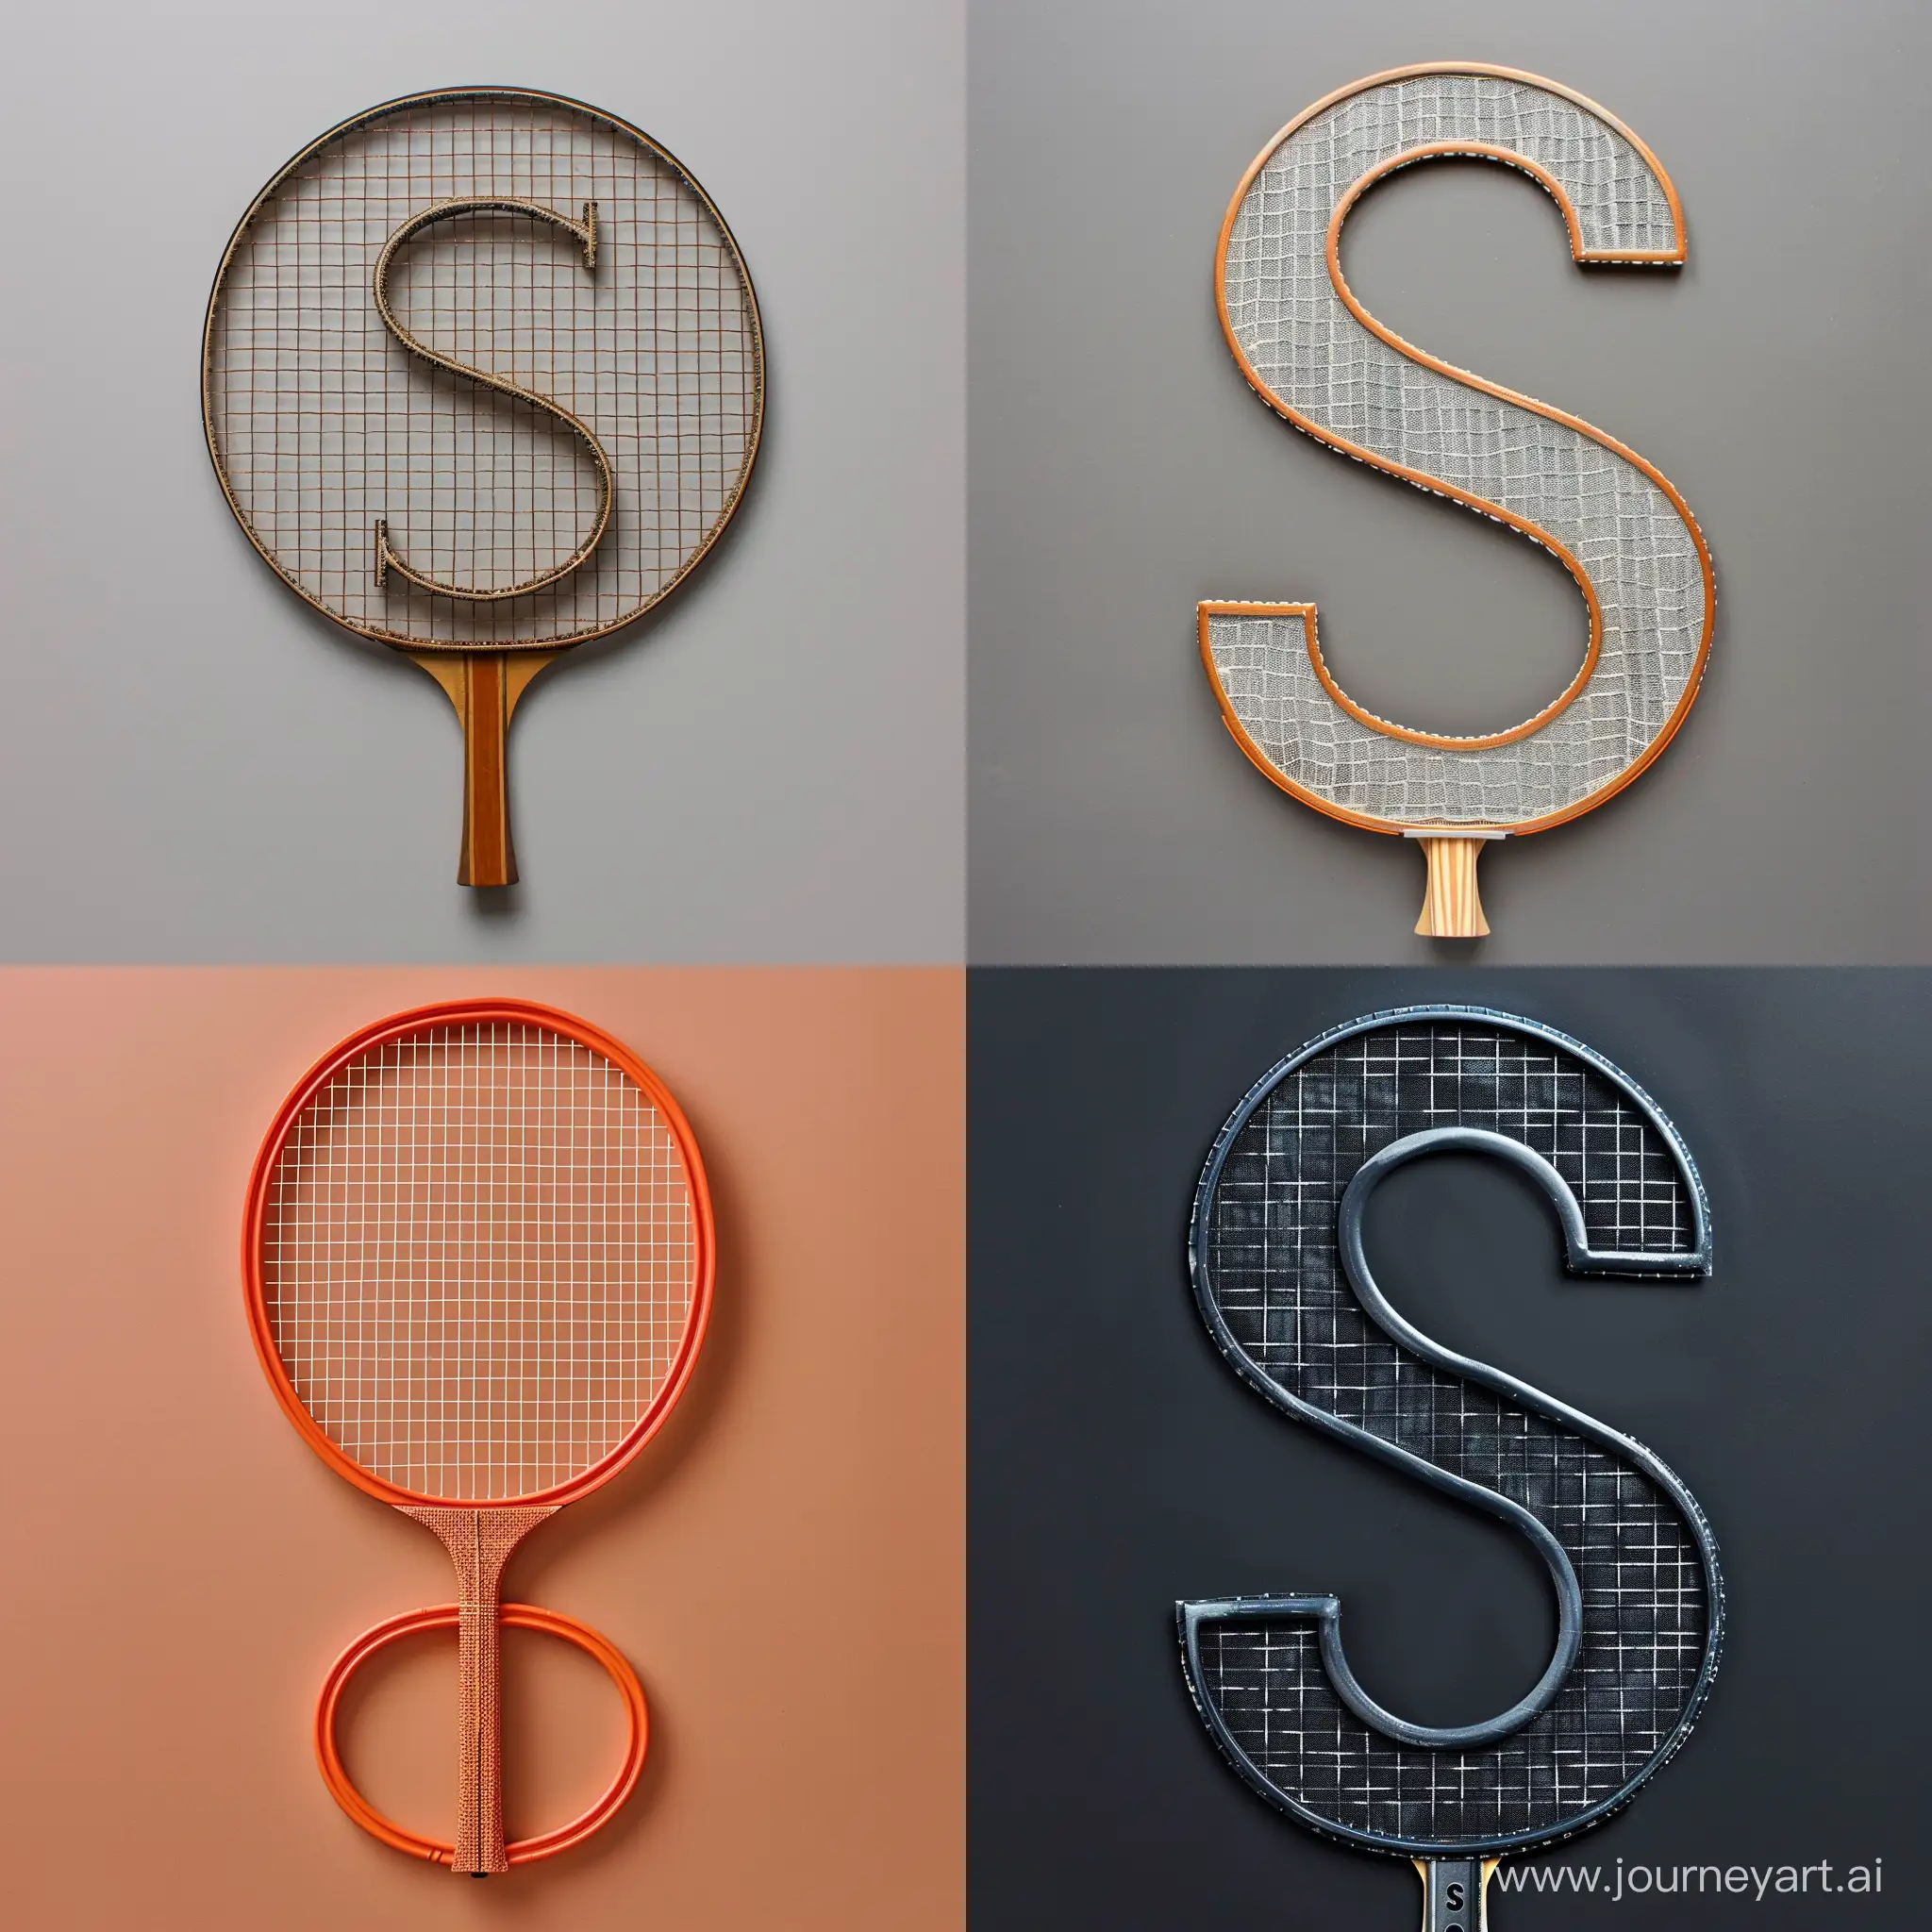 Letter-S-Ping-Pong-Racket-Creative-Sports-Equipment-Concept